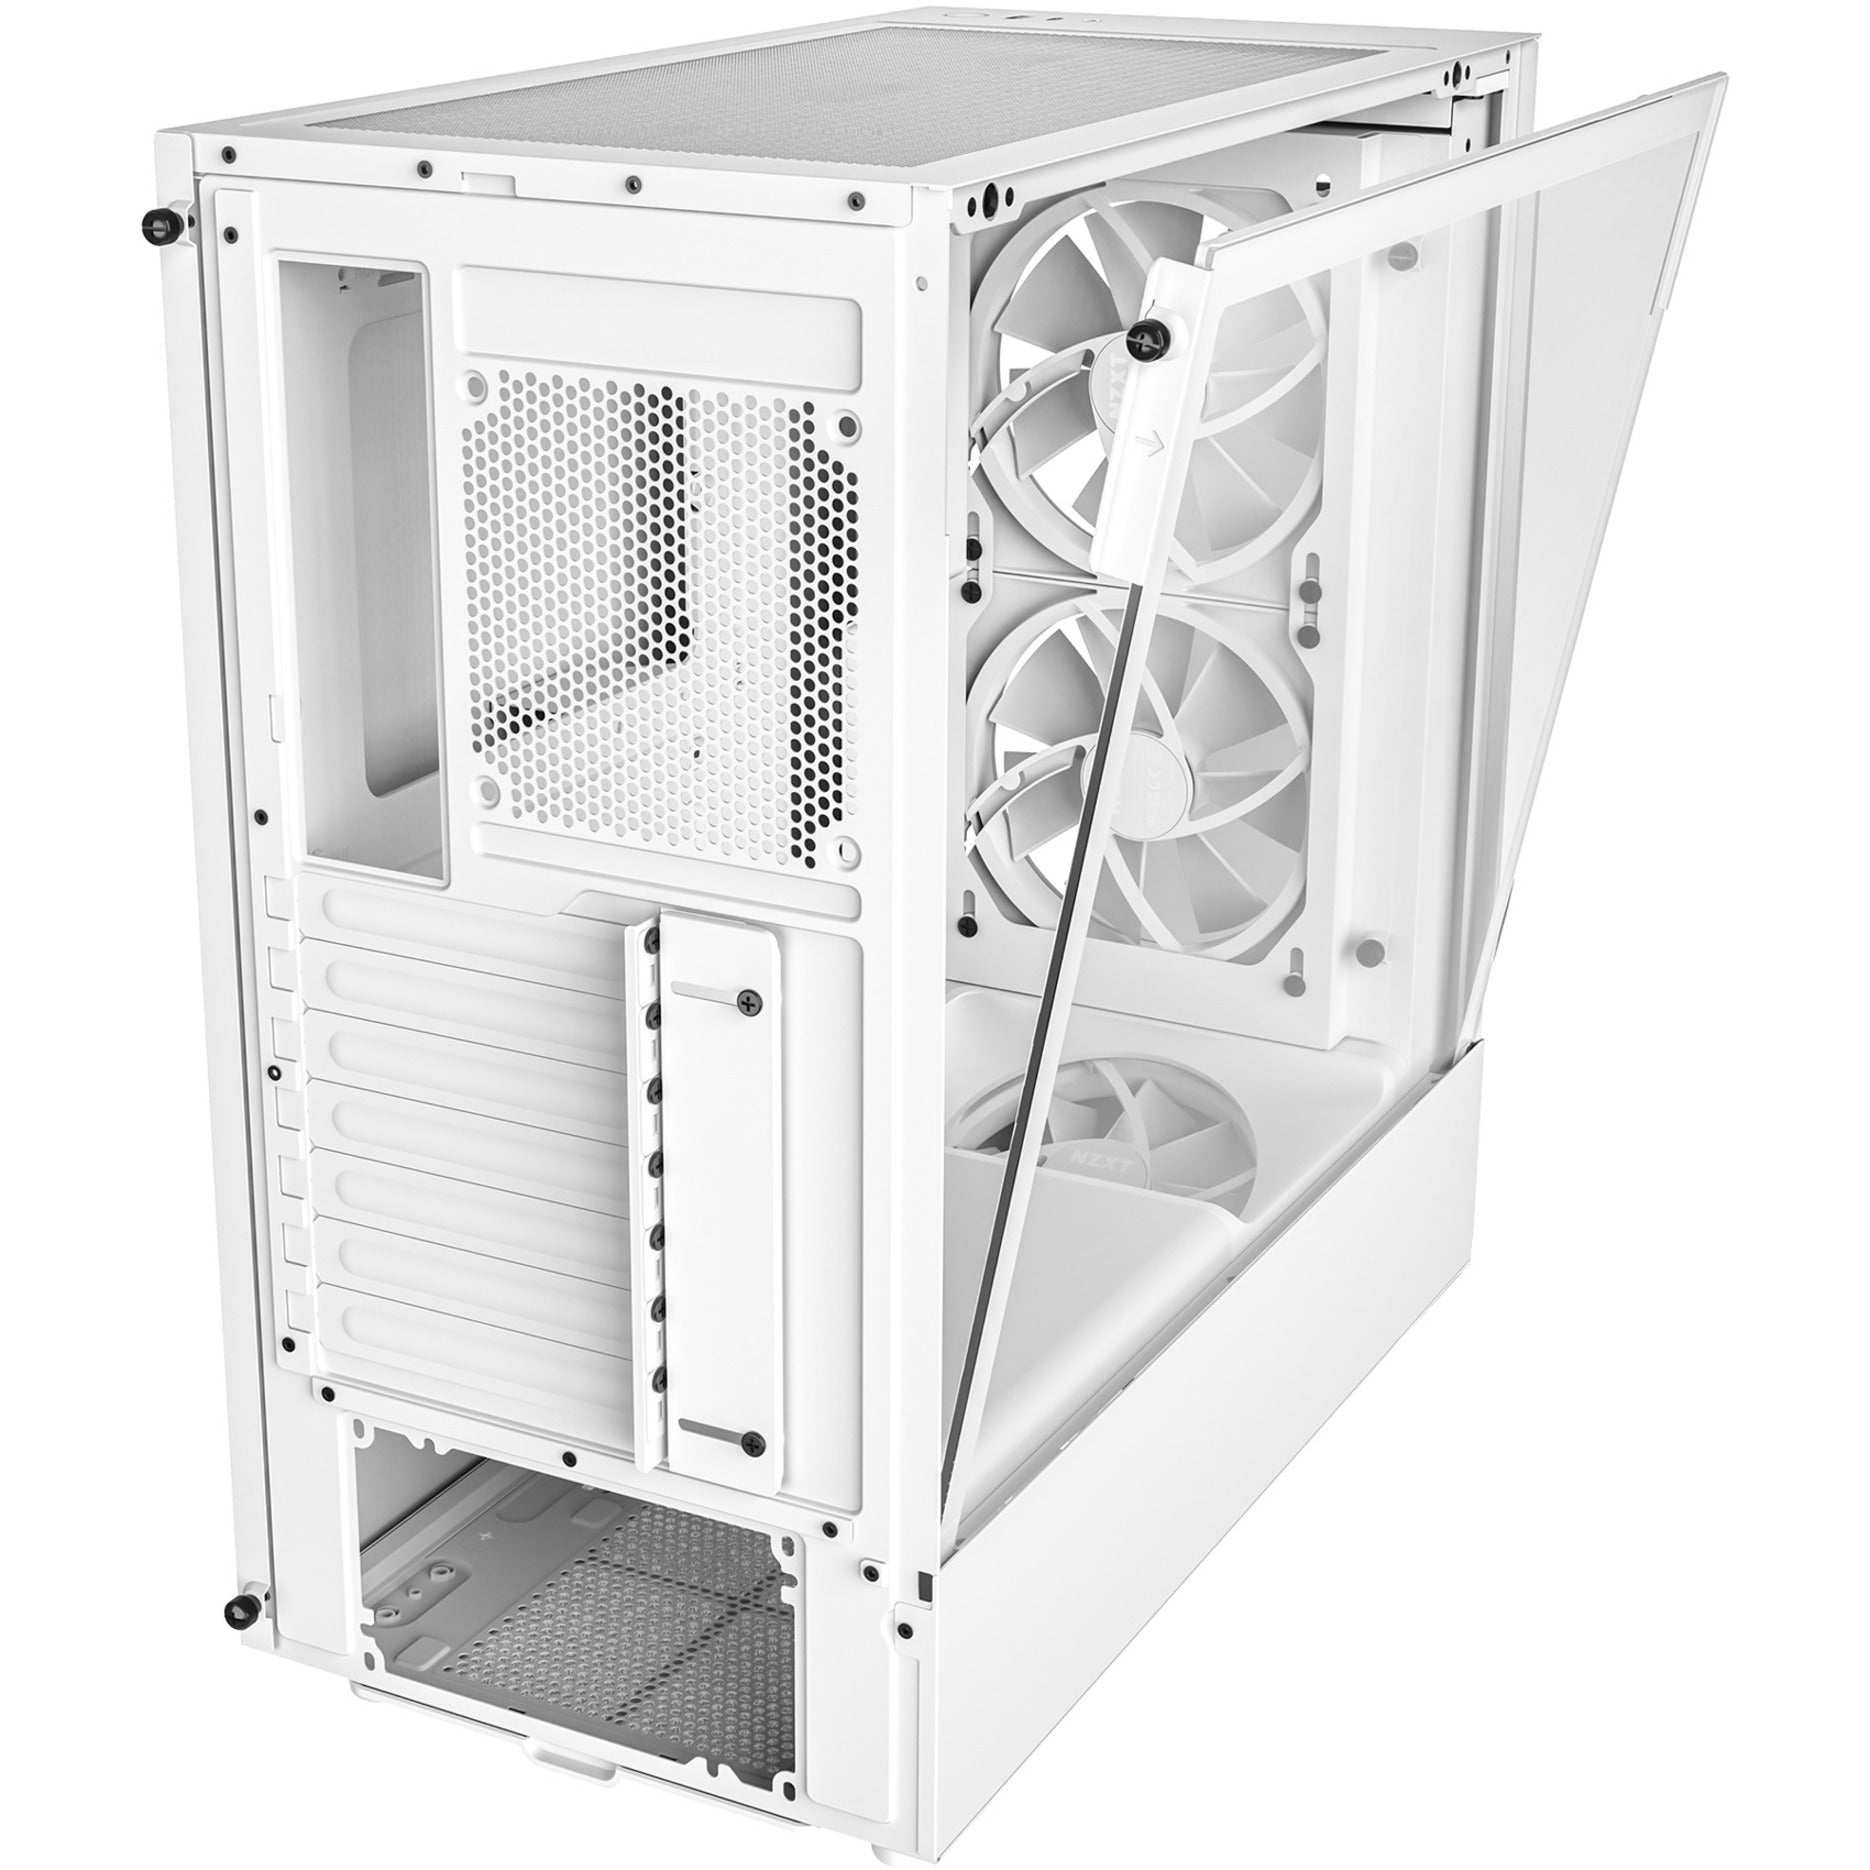 NZXT CC-H51EW-01 H5 Elite Premium Compact Mid-Tower Case, White, Tempered Glass, 2x 2.5" Bays, 1x 3.5" Bay, 7 Expansion Slots, 2 USB Ports, Micro ATX/Mini ITX/ATX Supported, 3 Fans Installed